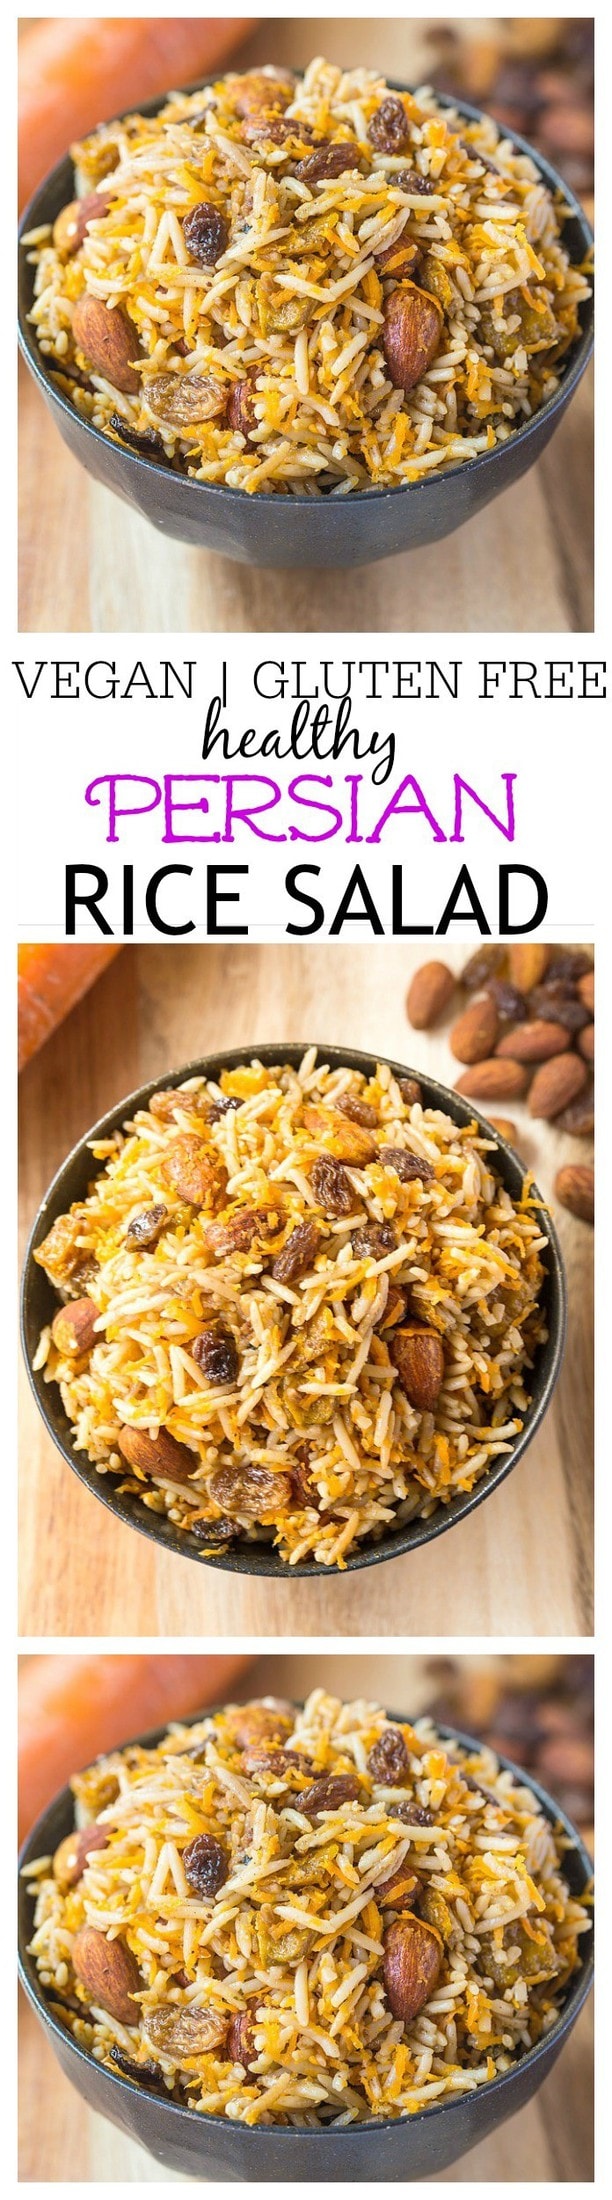 Vegan Persian Rice Salad- A delicious, Persian style sweet and savoury salad based off almonds, raisins and fragrant basmati rice. Perfect eaten hot or cold, this salad is vegan, gluten free and light and fresh- Perfect for any meal, especially a mother's day brunch! @thebigmansworld - thebigmansworld.com